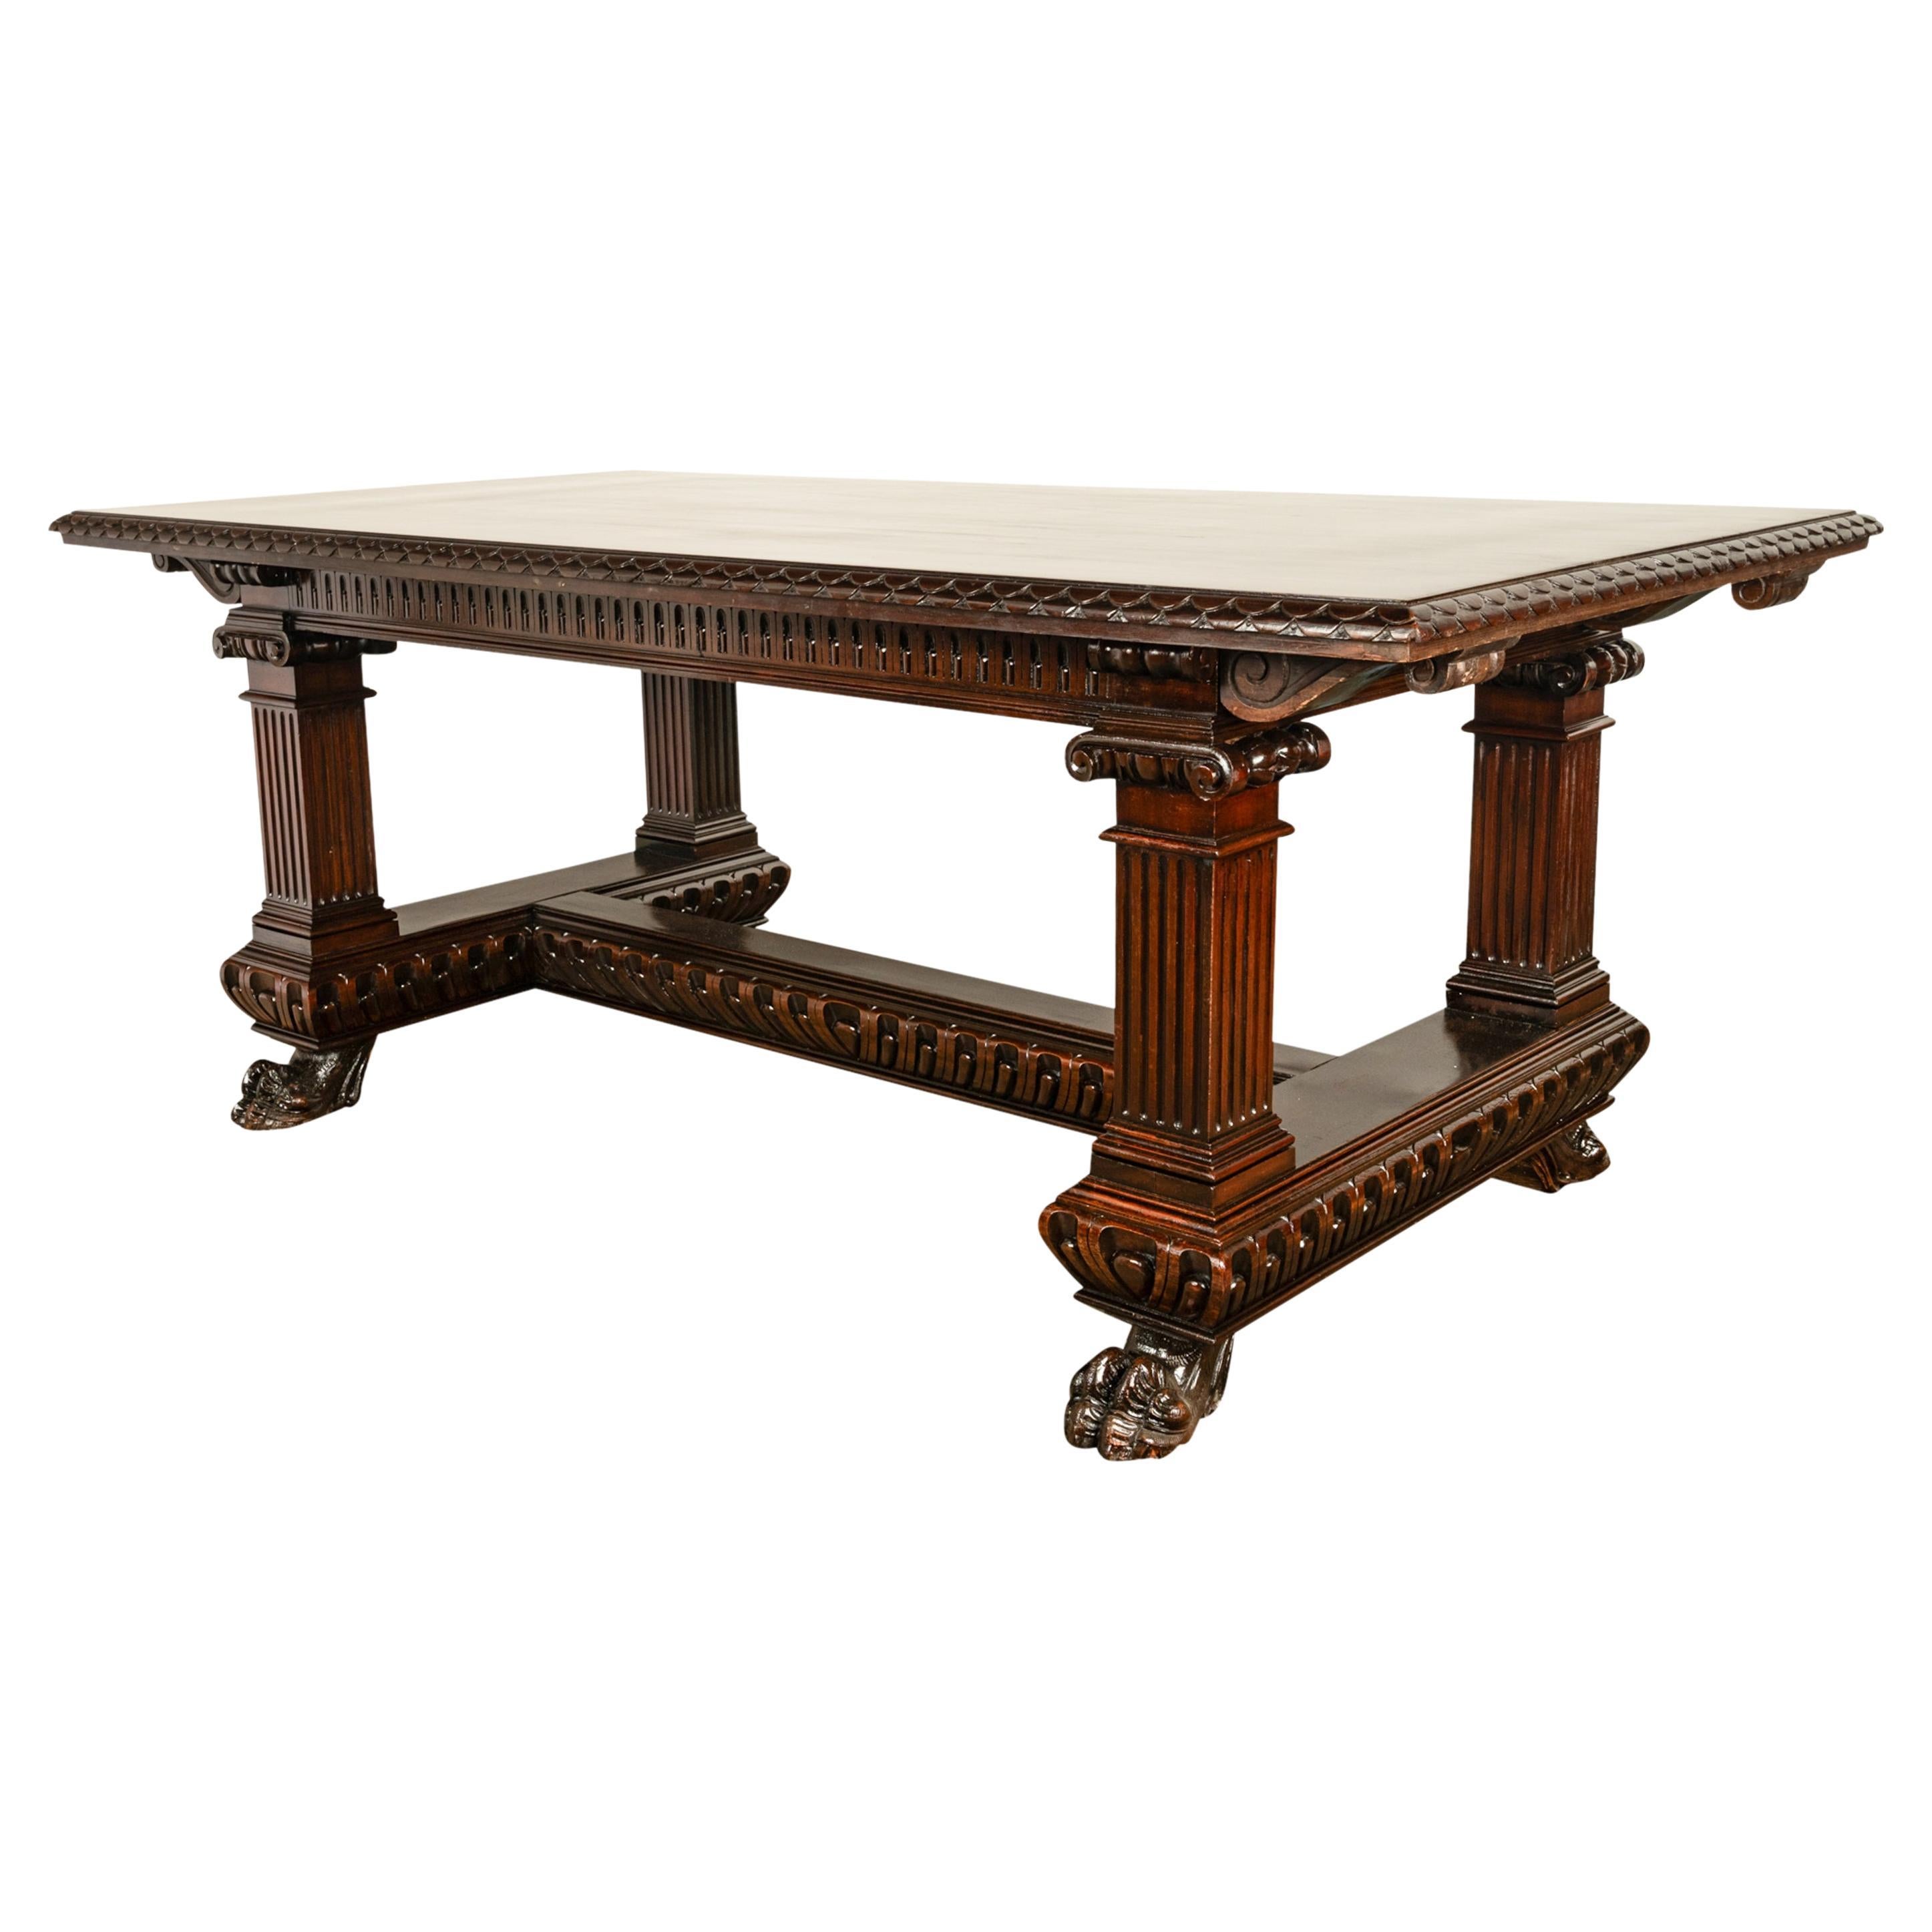 Antique Italian Carved Renaissance Revival Walnut Library Dining Table 1880 For Sale